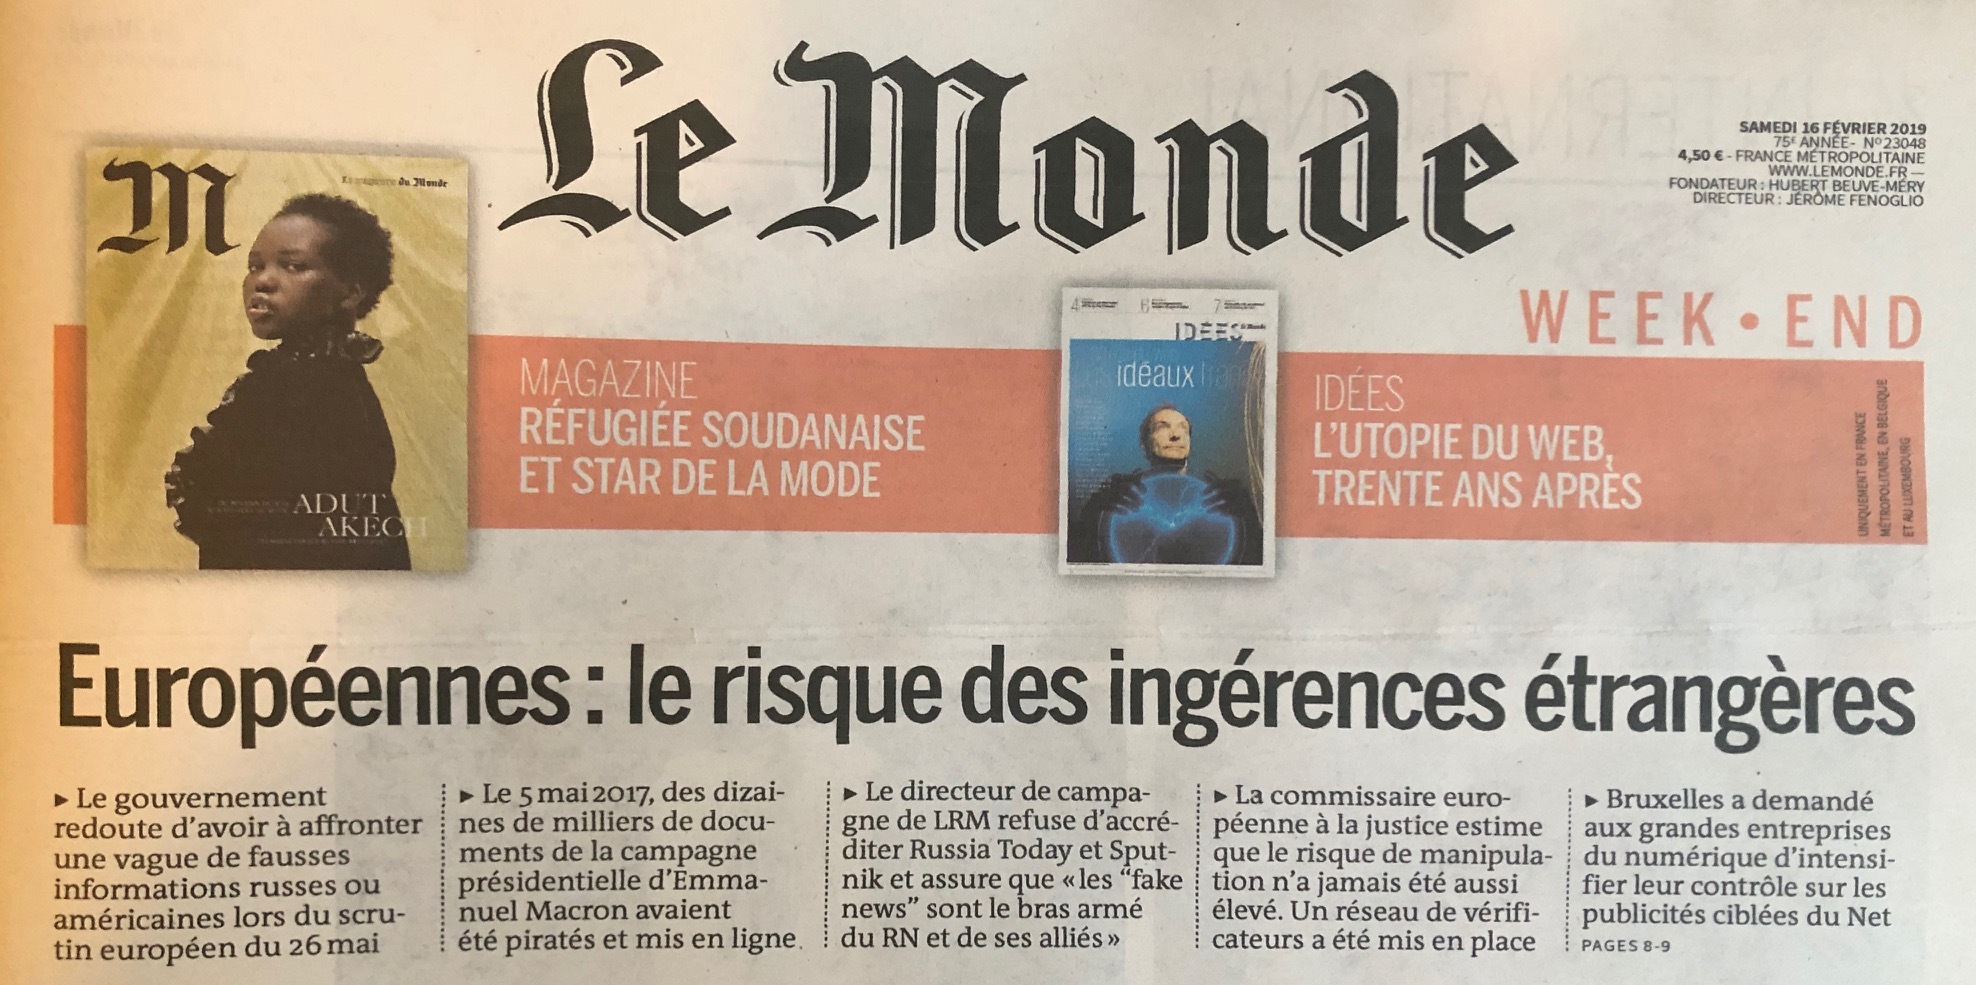 Le Monde denounces the high risk of “foreign interferences” in the European elections